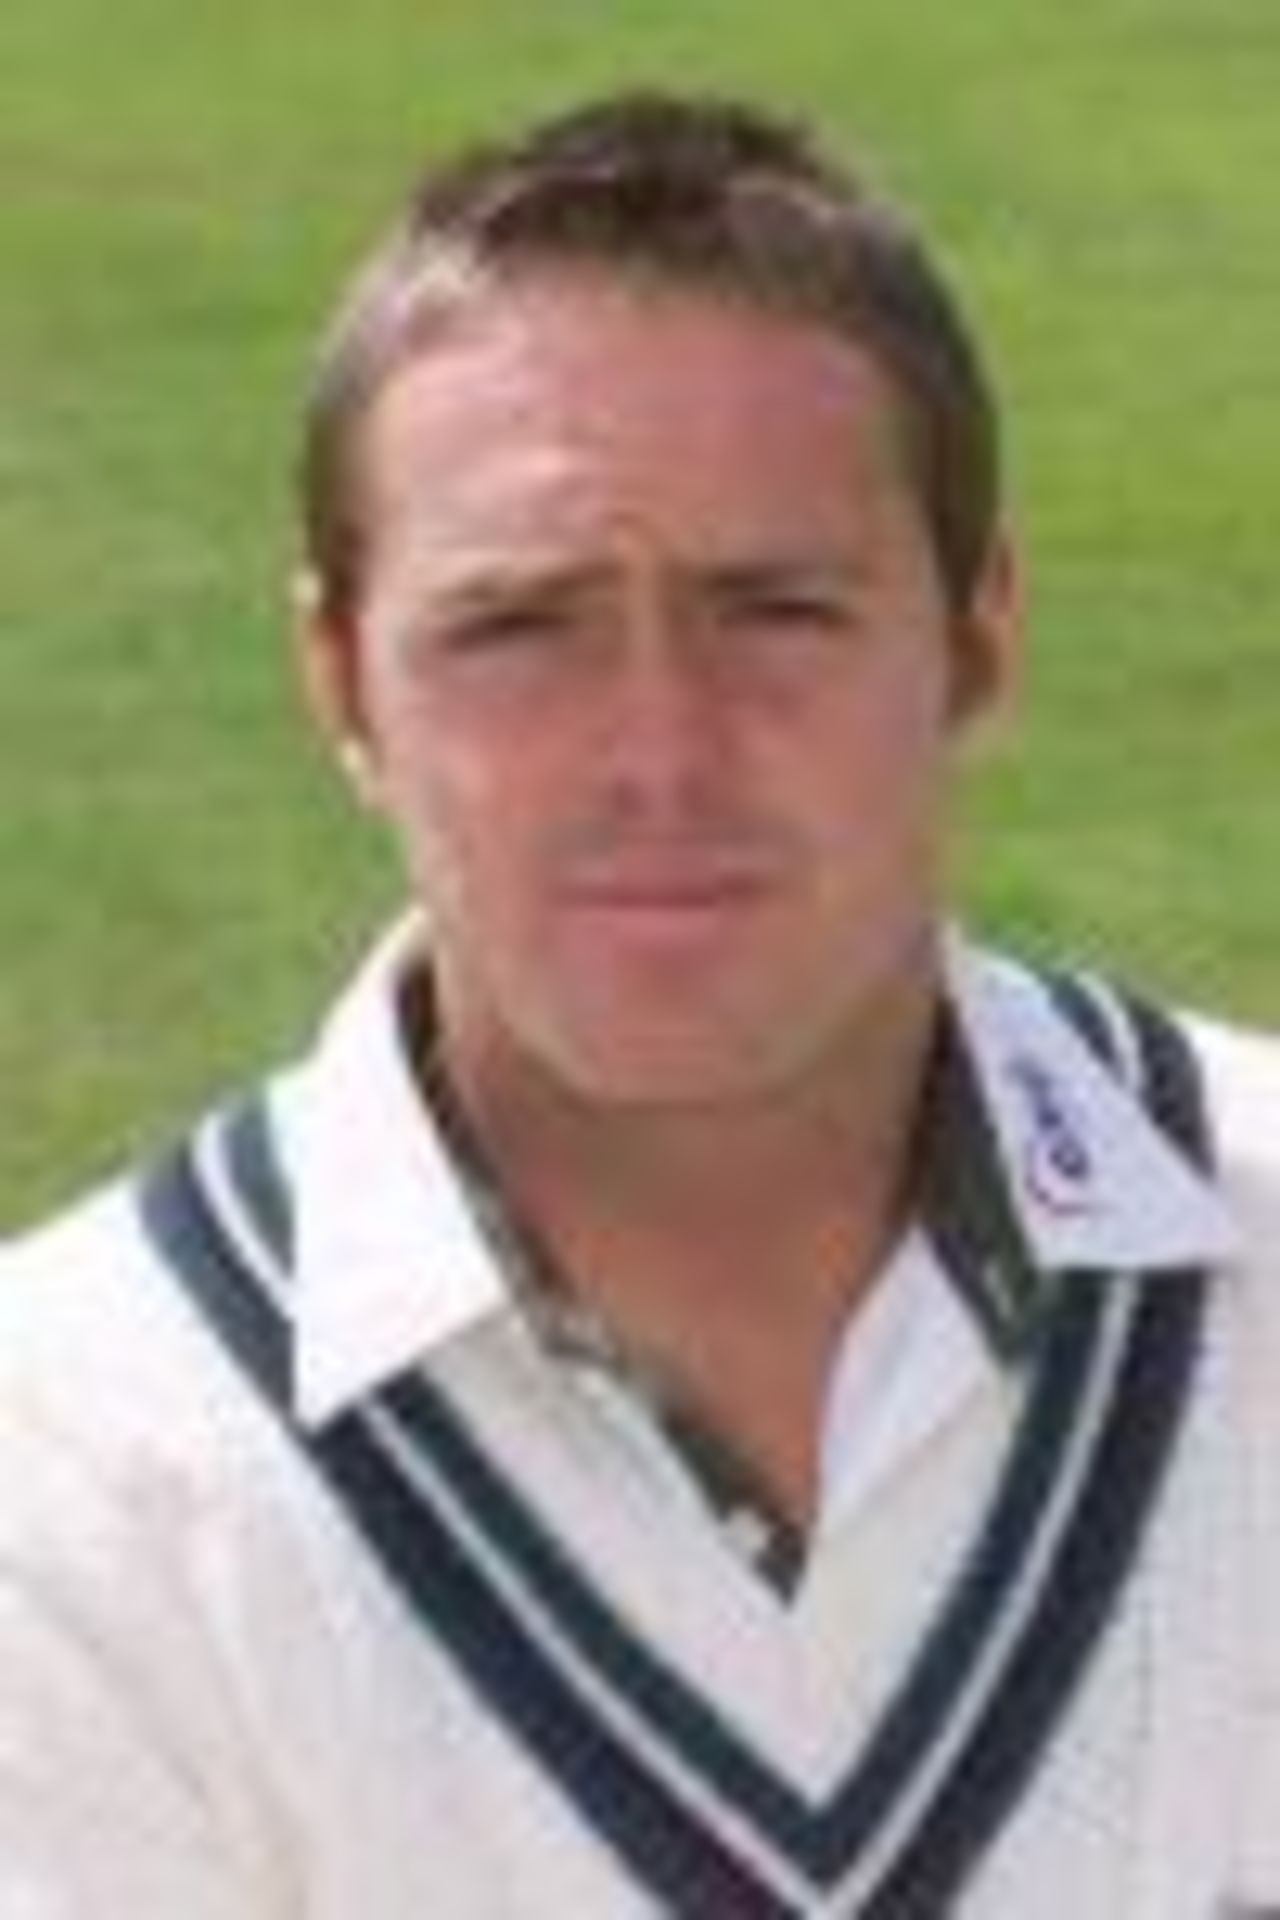 Taken at the Worcs  CCC Photocall, April 2001